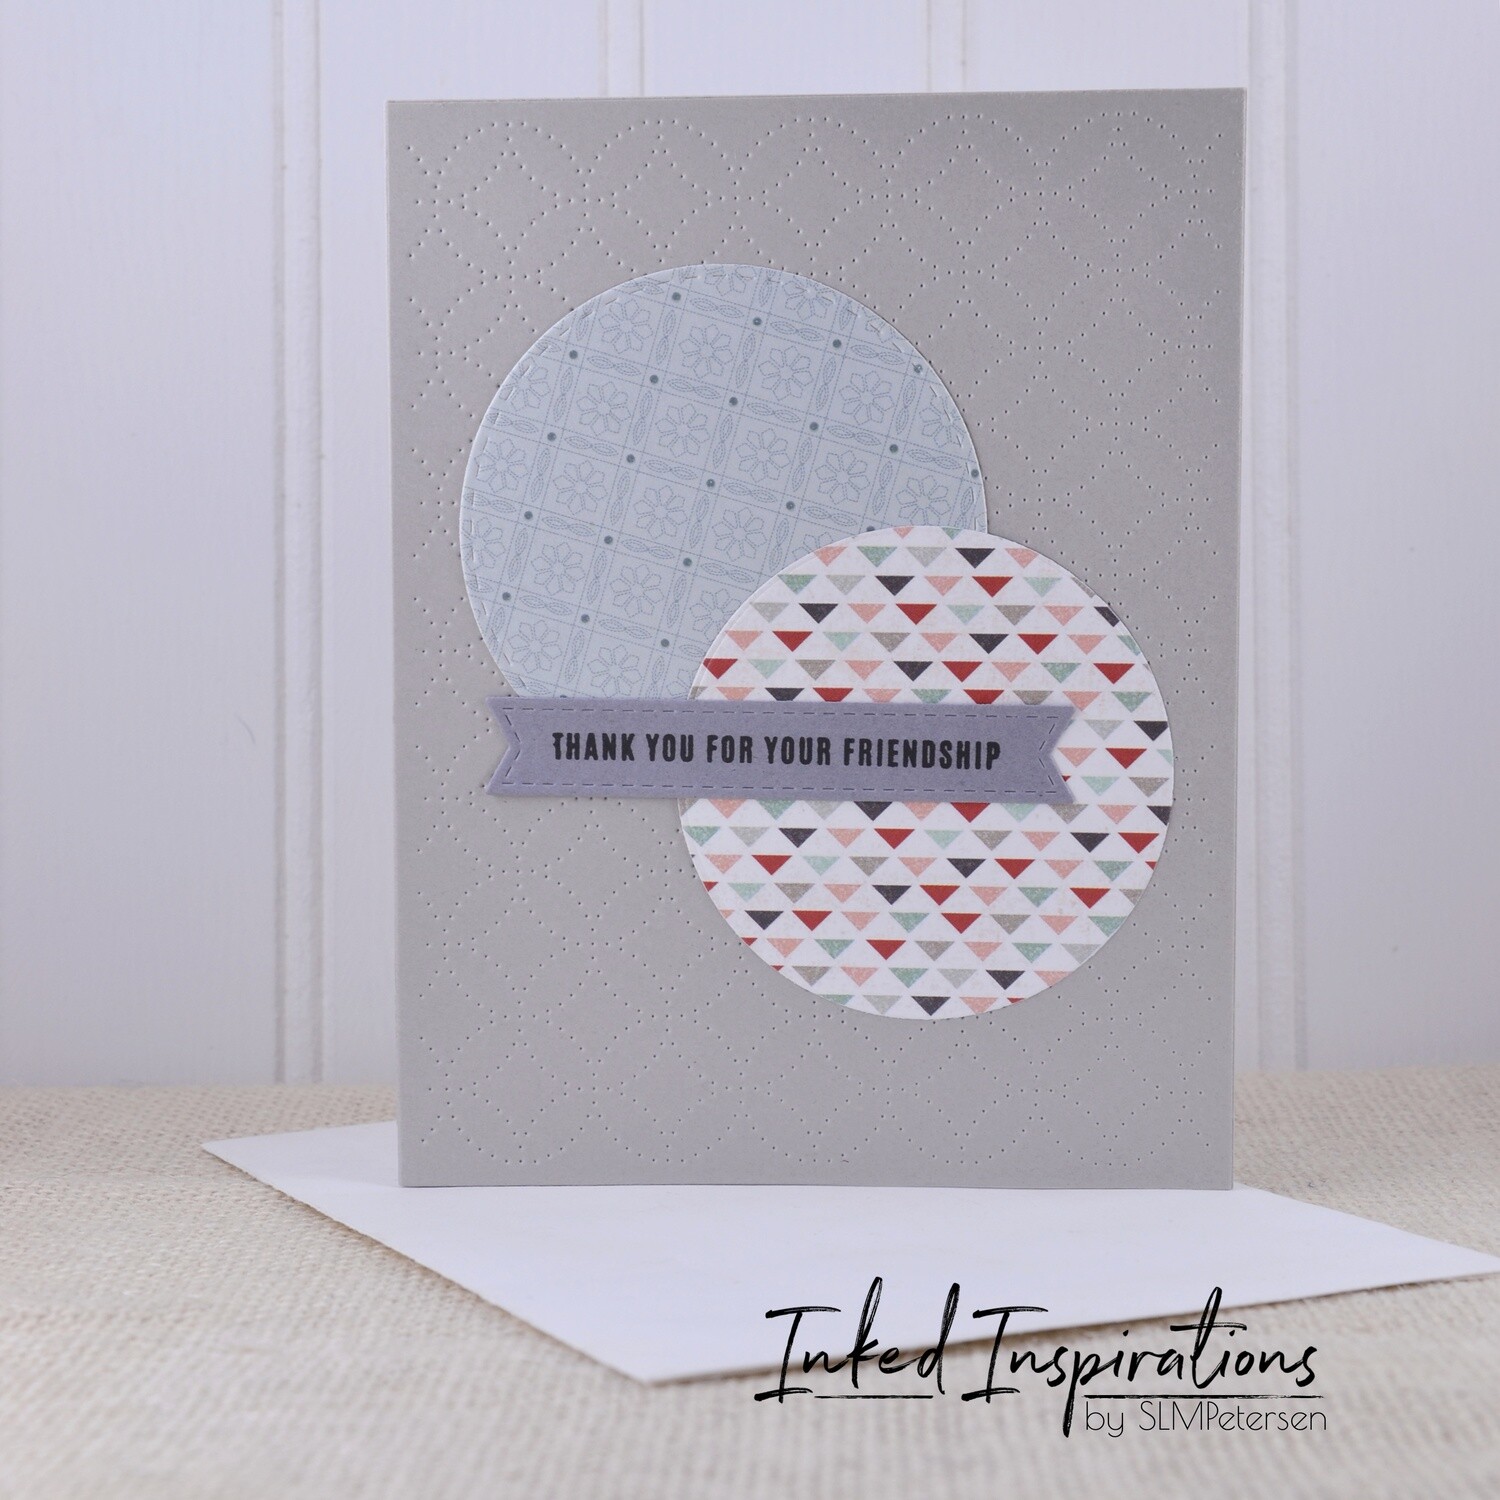 Thank You for Your Friendship - Quilted Circles